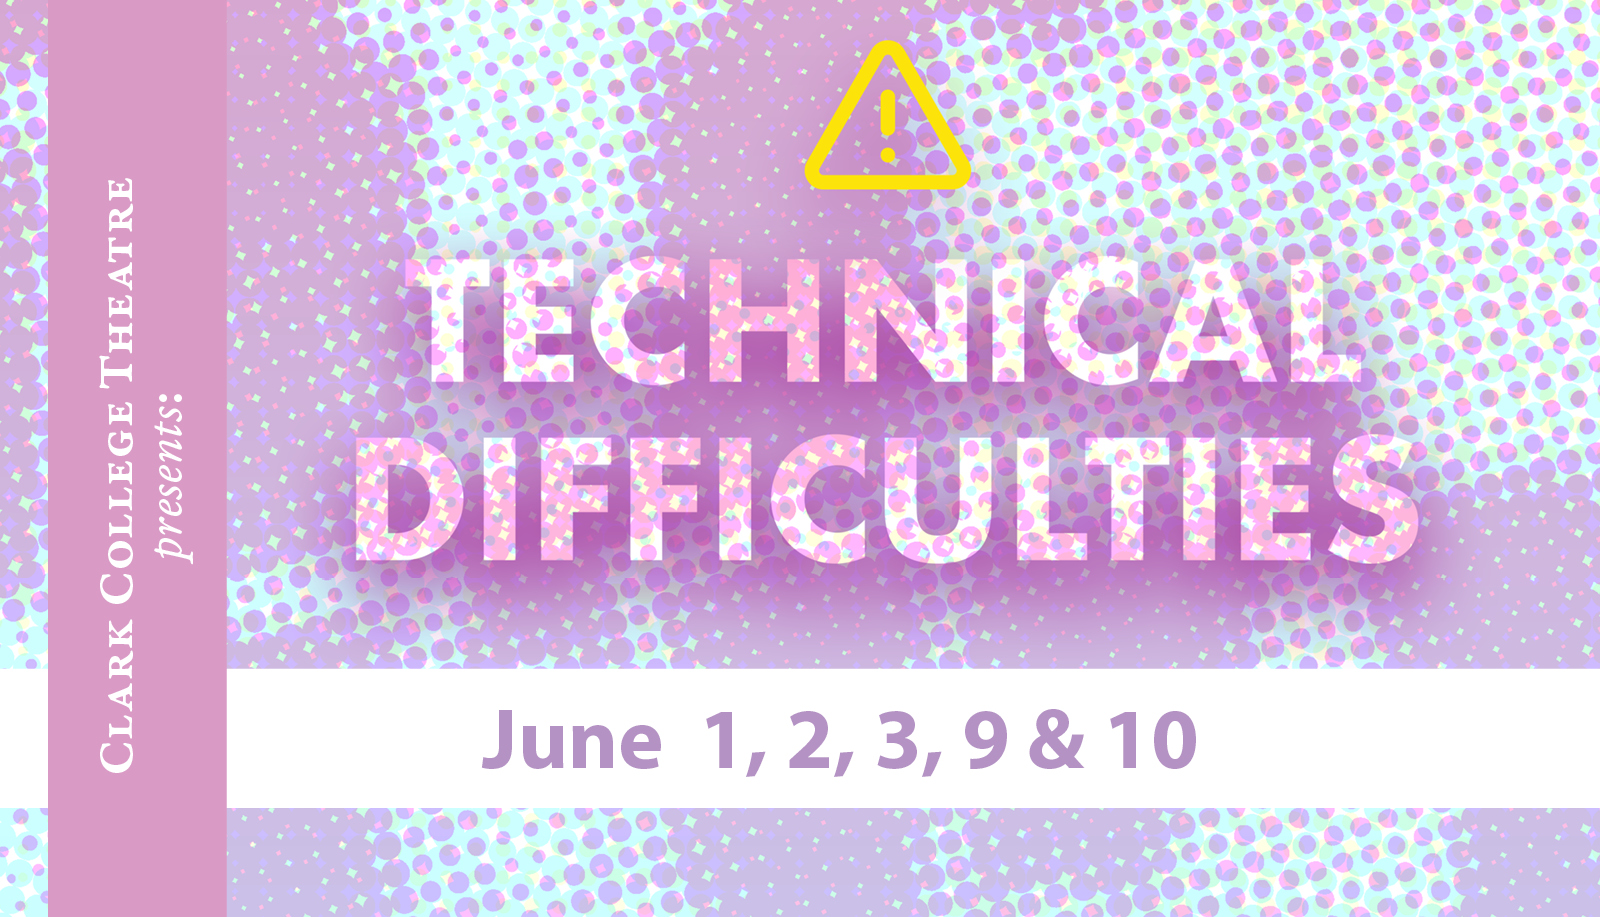 Technical Difficulties words on pixelated pastel colored background